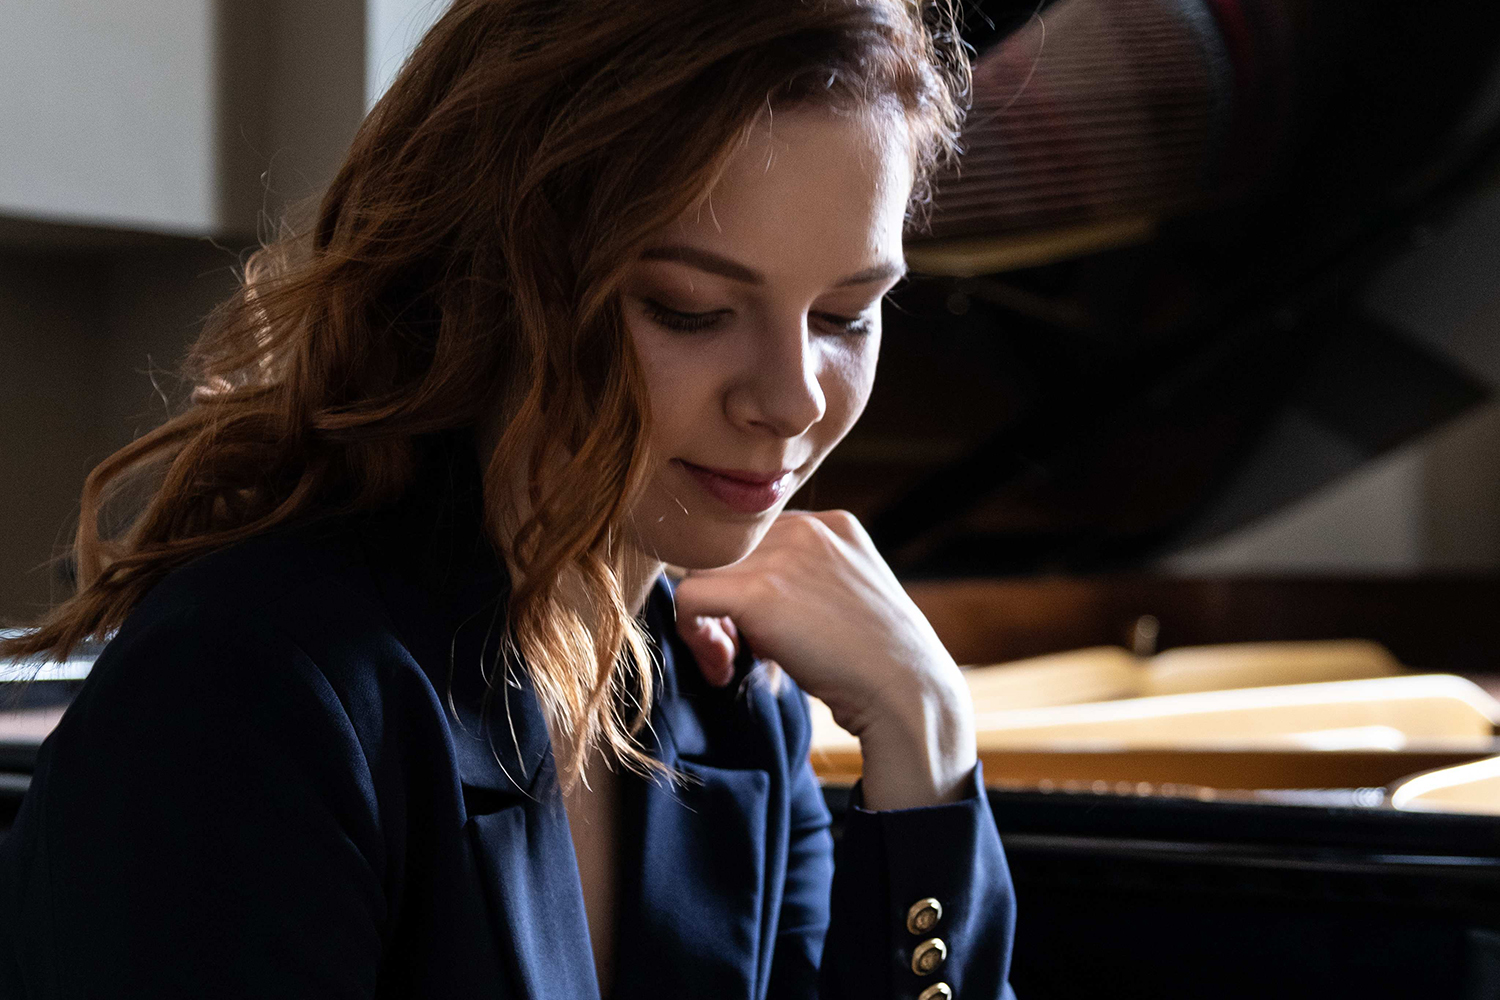 A close up image of a woman looking down sitting next to a grand piano 